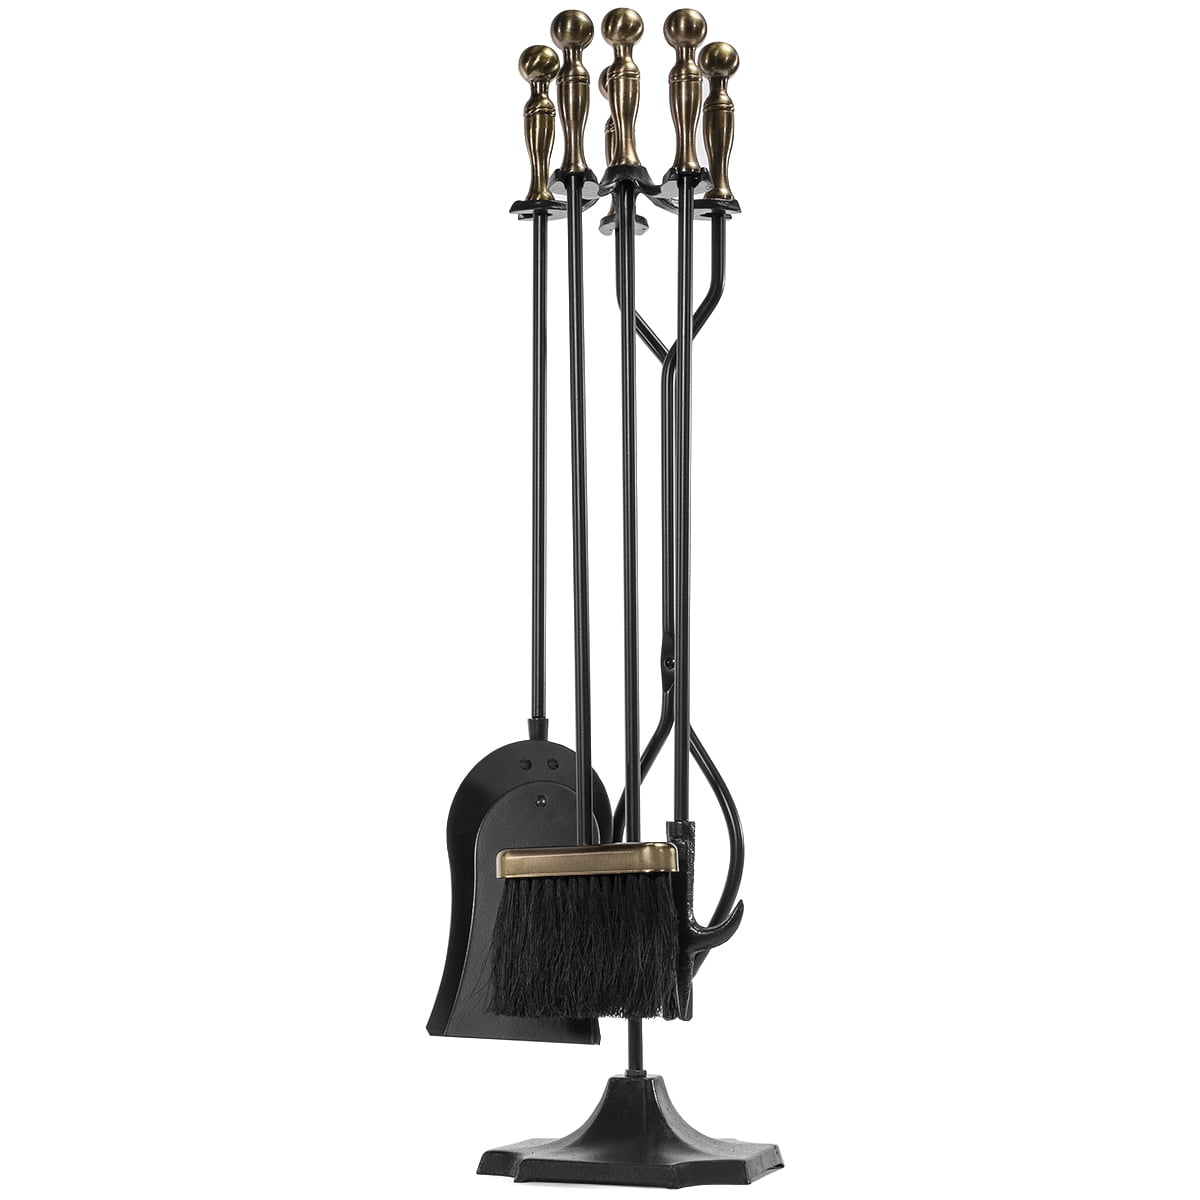 Coal Shovel With Brush Poker And Pair Of Tongs by Inglenook EshopRetailLtd Inglenook 5pc Fireplace Companion Fireware Fire Tools Set in Black 